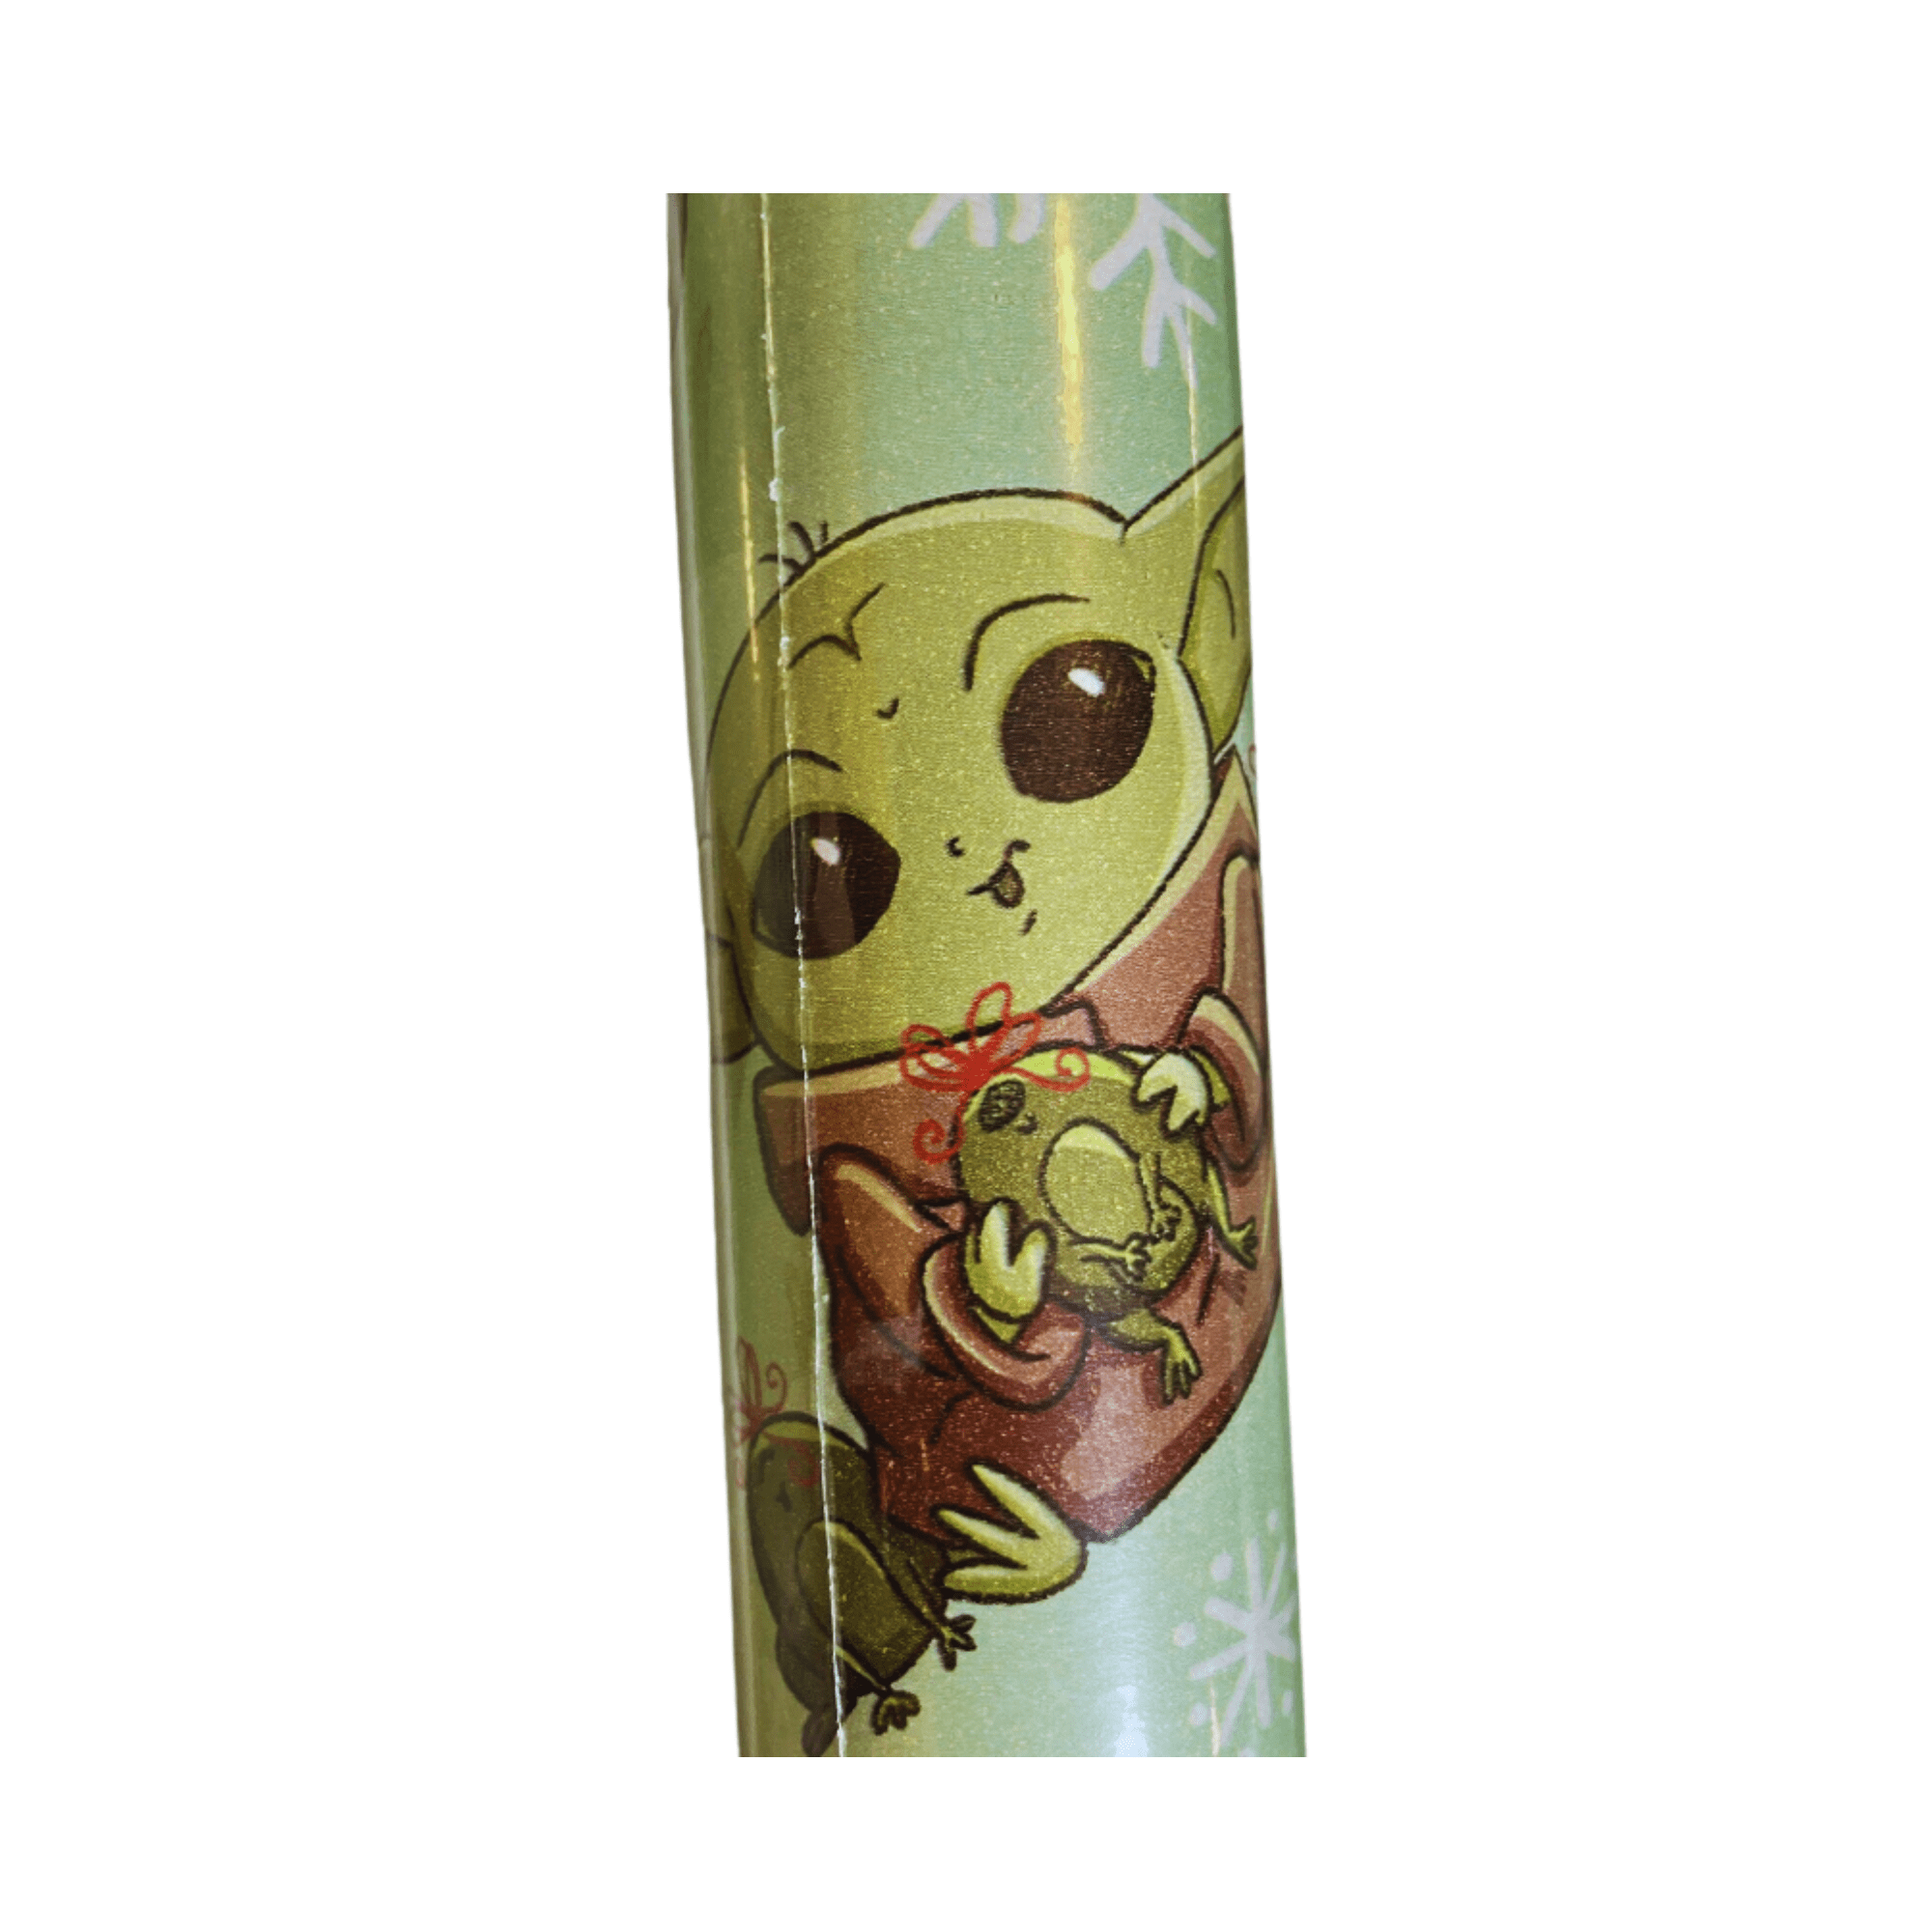 American Greetings Star Wars Mandalorian Wrapping Paper, The Child/Baby  Yoda (1 Roll, 75 sq. ft.)